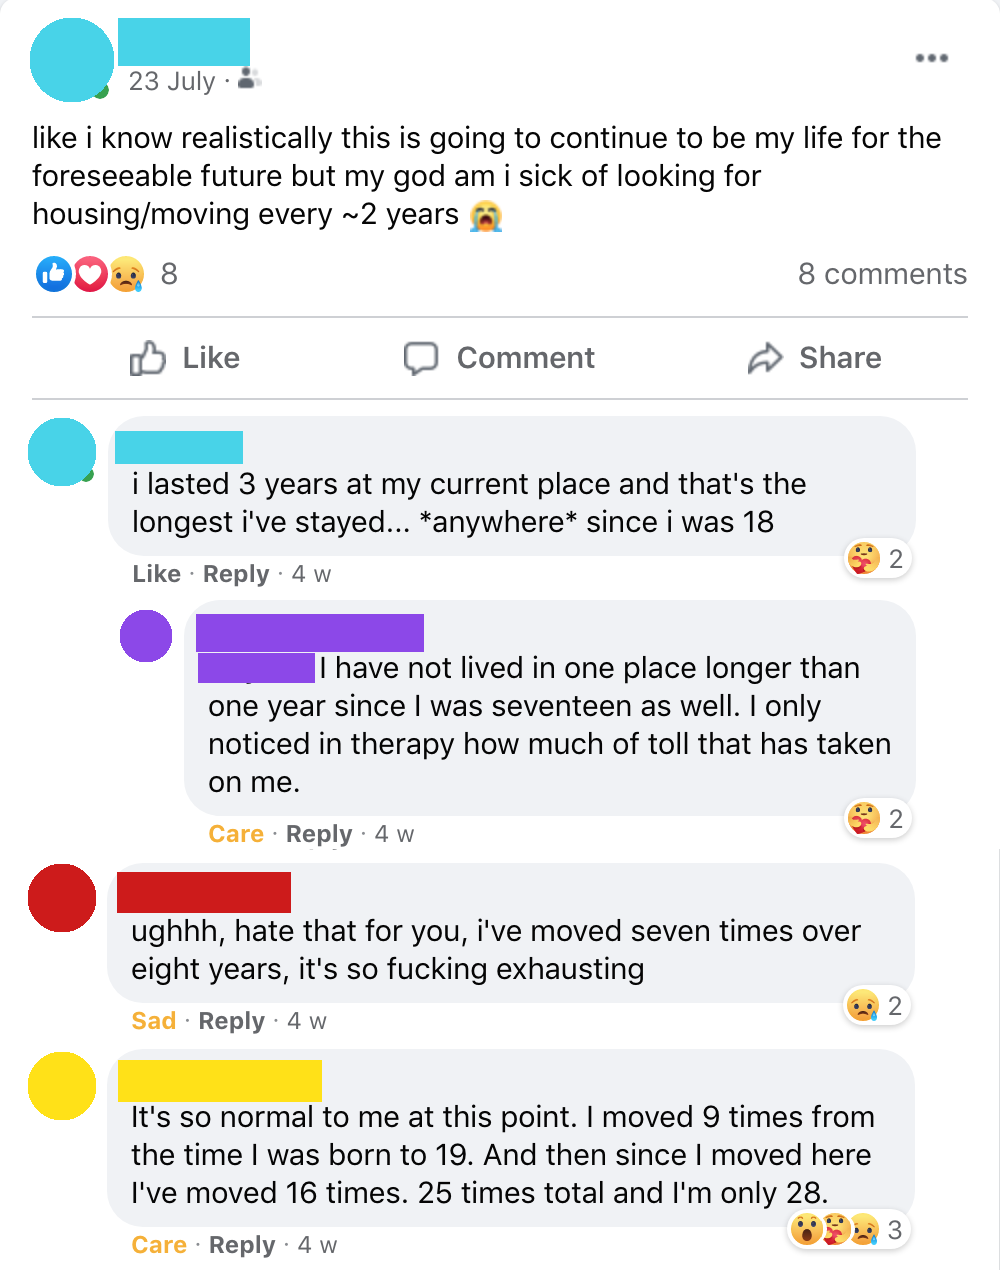 facebook post that reads: "like i know realistically this is going to continue to be my life for the foreseeable future but my god am i sick of looking for housing/moving every ~2 years", followed by several replies from people who've had it much worse than me. sigh.